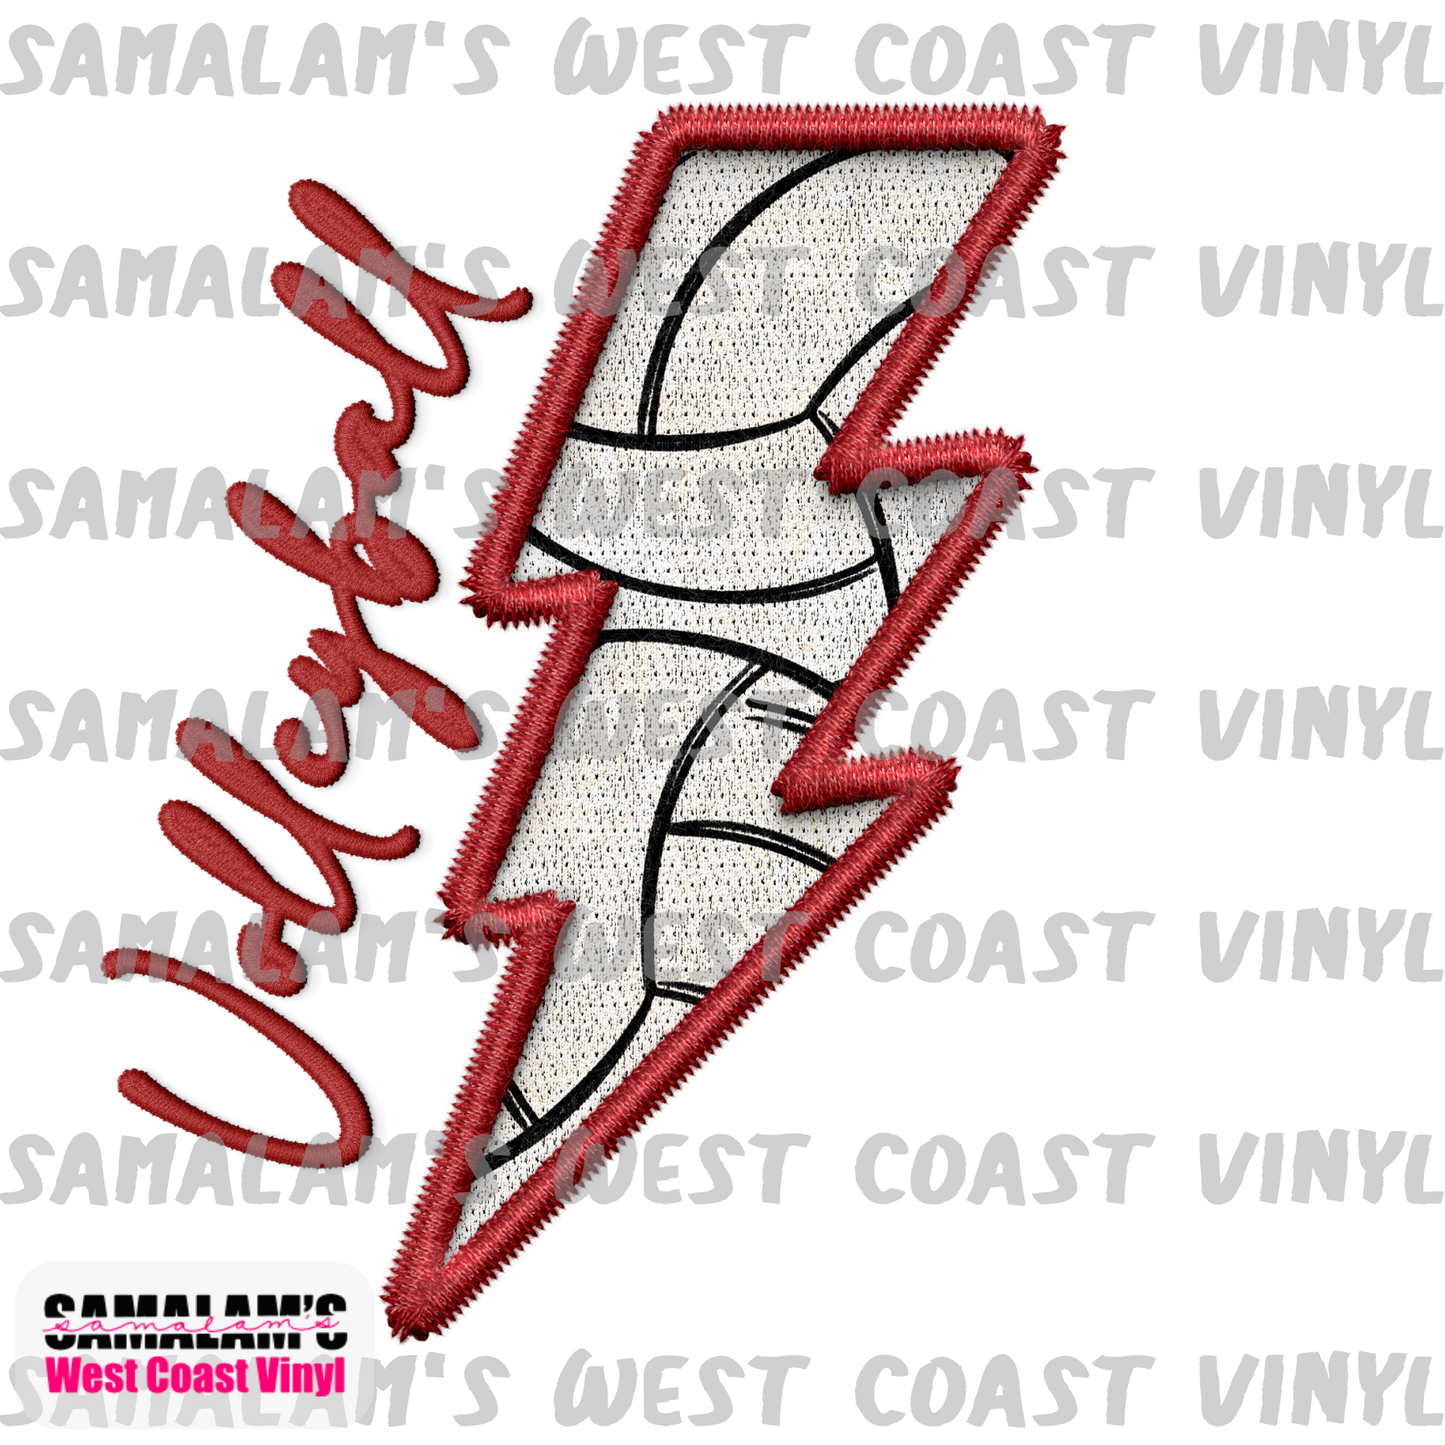 Embroidery - Lightning Bolt - Volleyball 2 - Sublimation Transfer